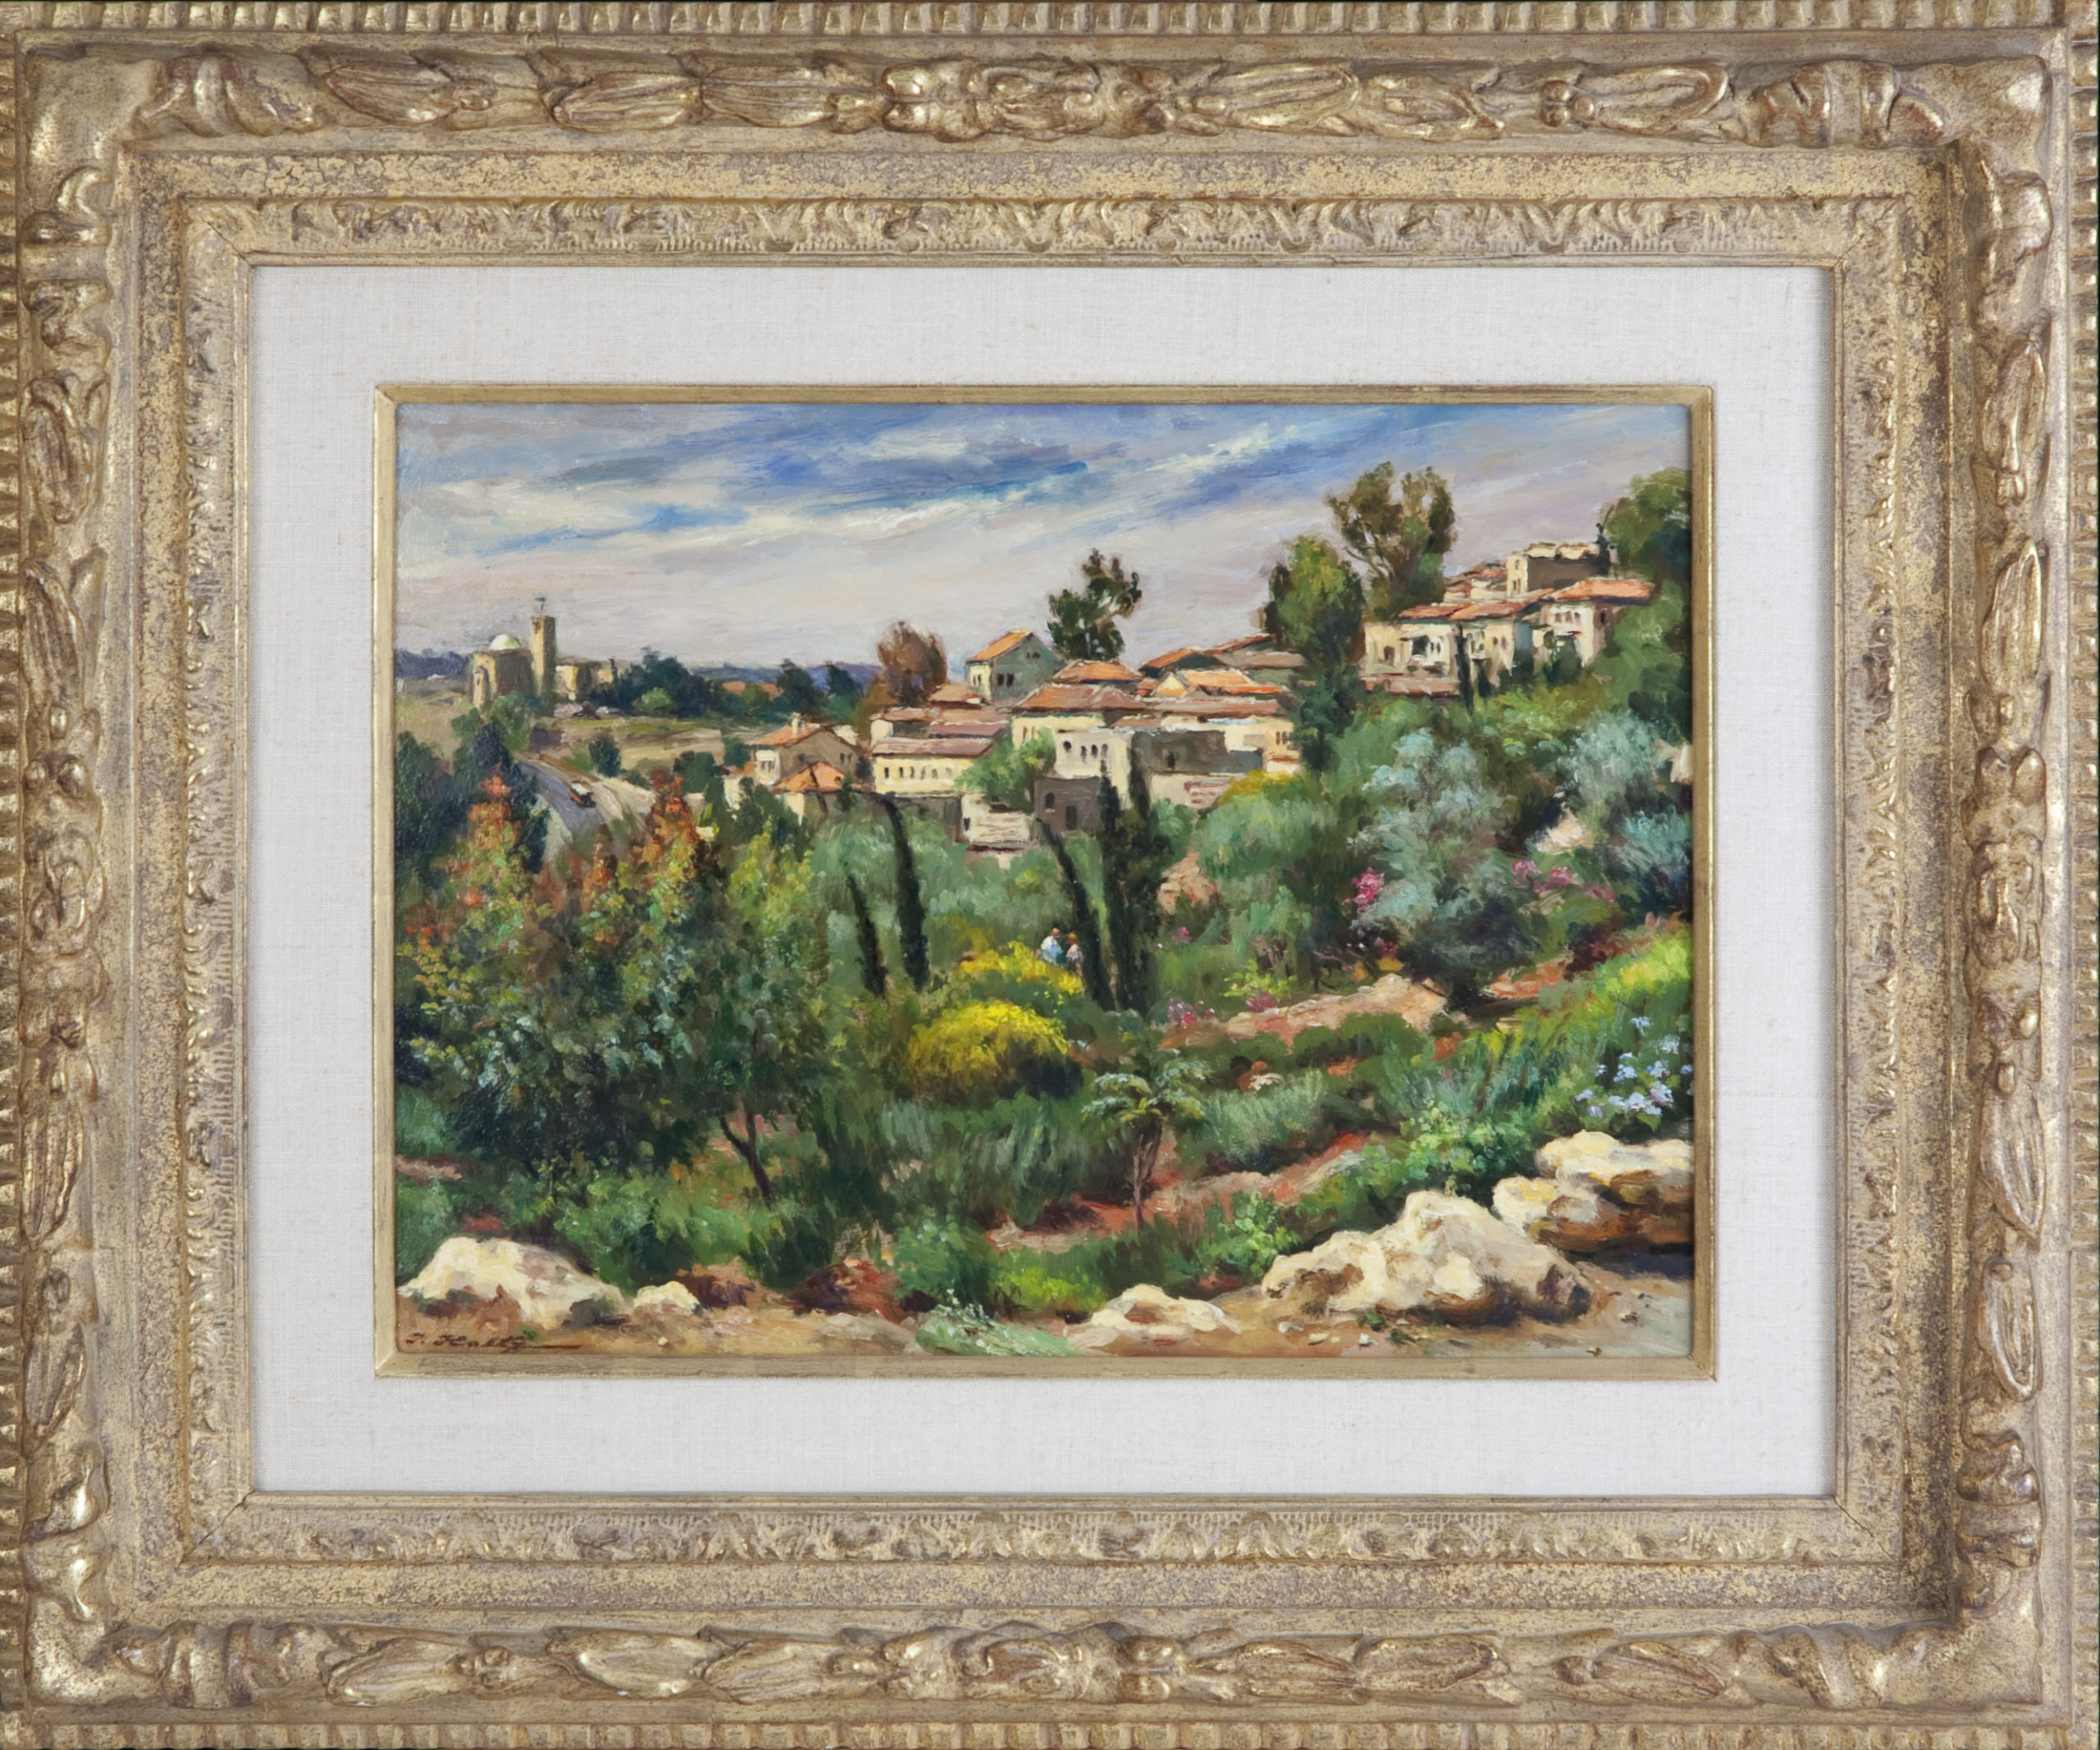 067 Jerusalem church in background bus going up road 1977 - Oil on Masonite - 16 x 12 - Frame: 25.5 x 21.5 x 2.5